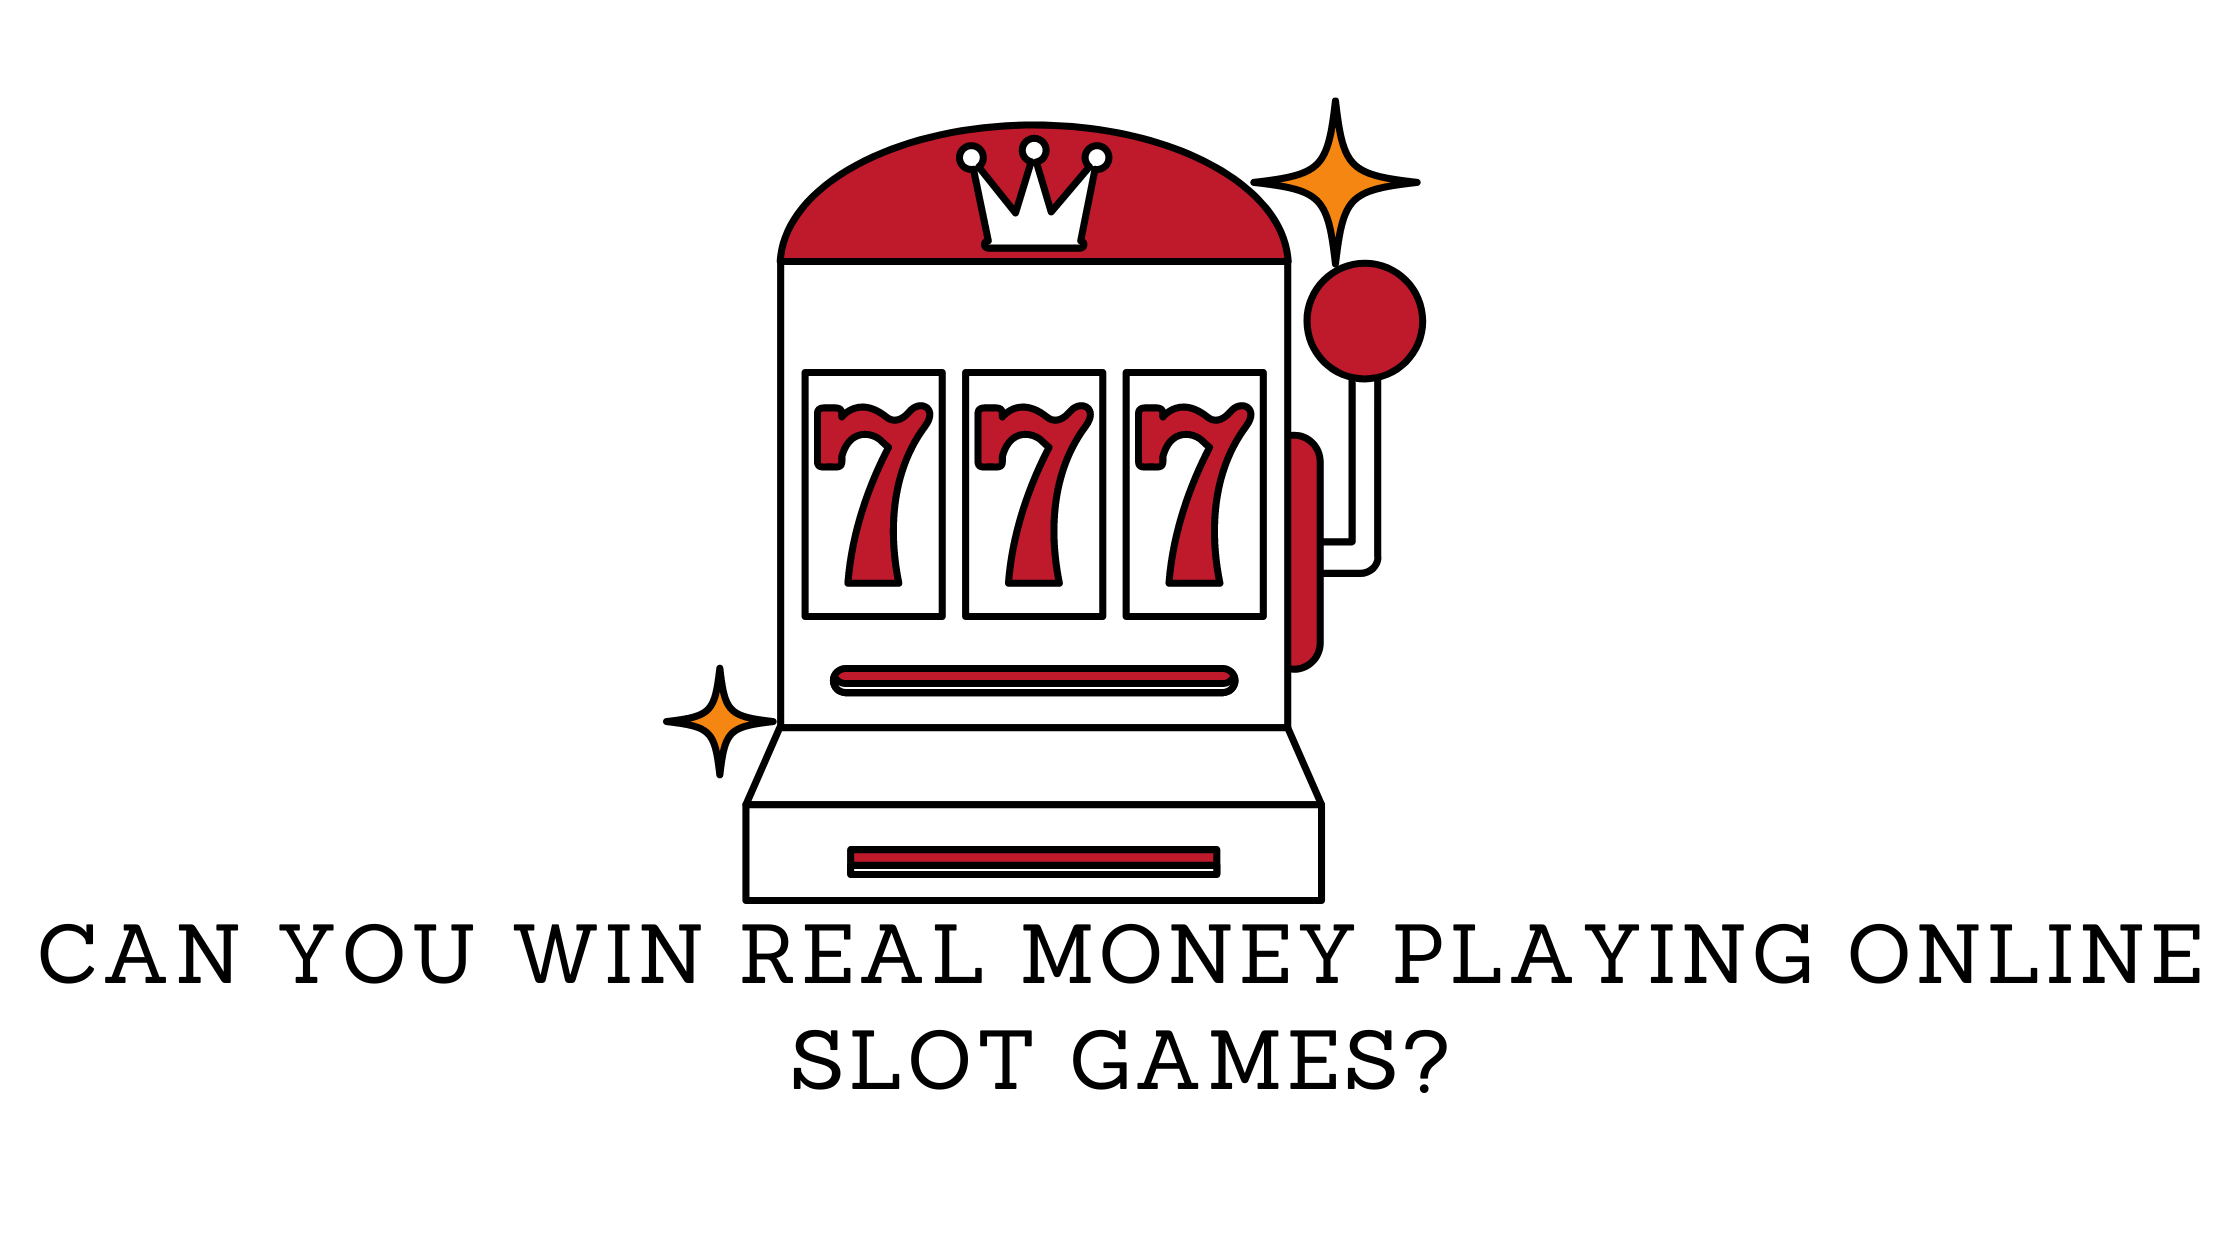 Can You Win Real Money Playing Online Slot Games?